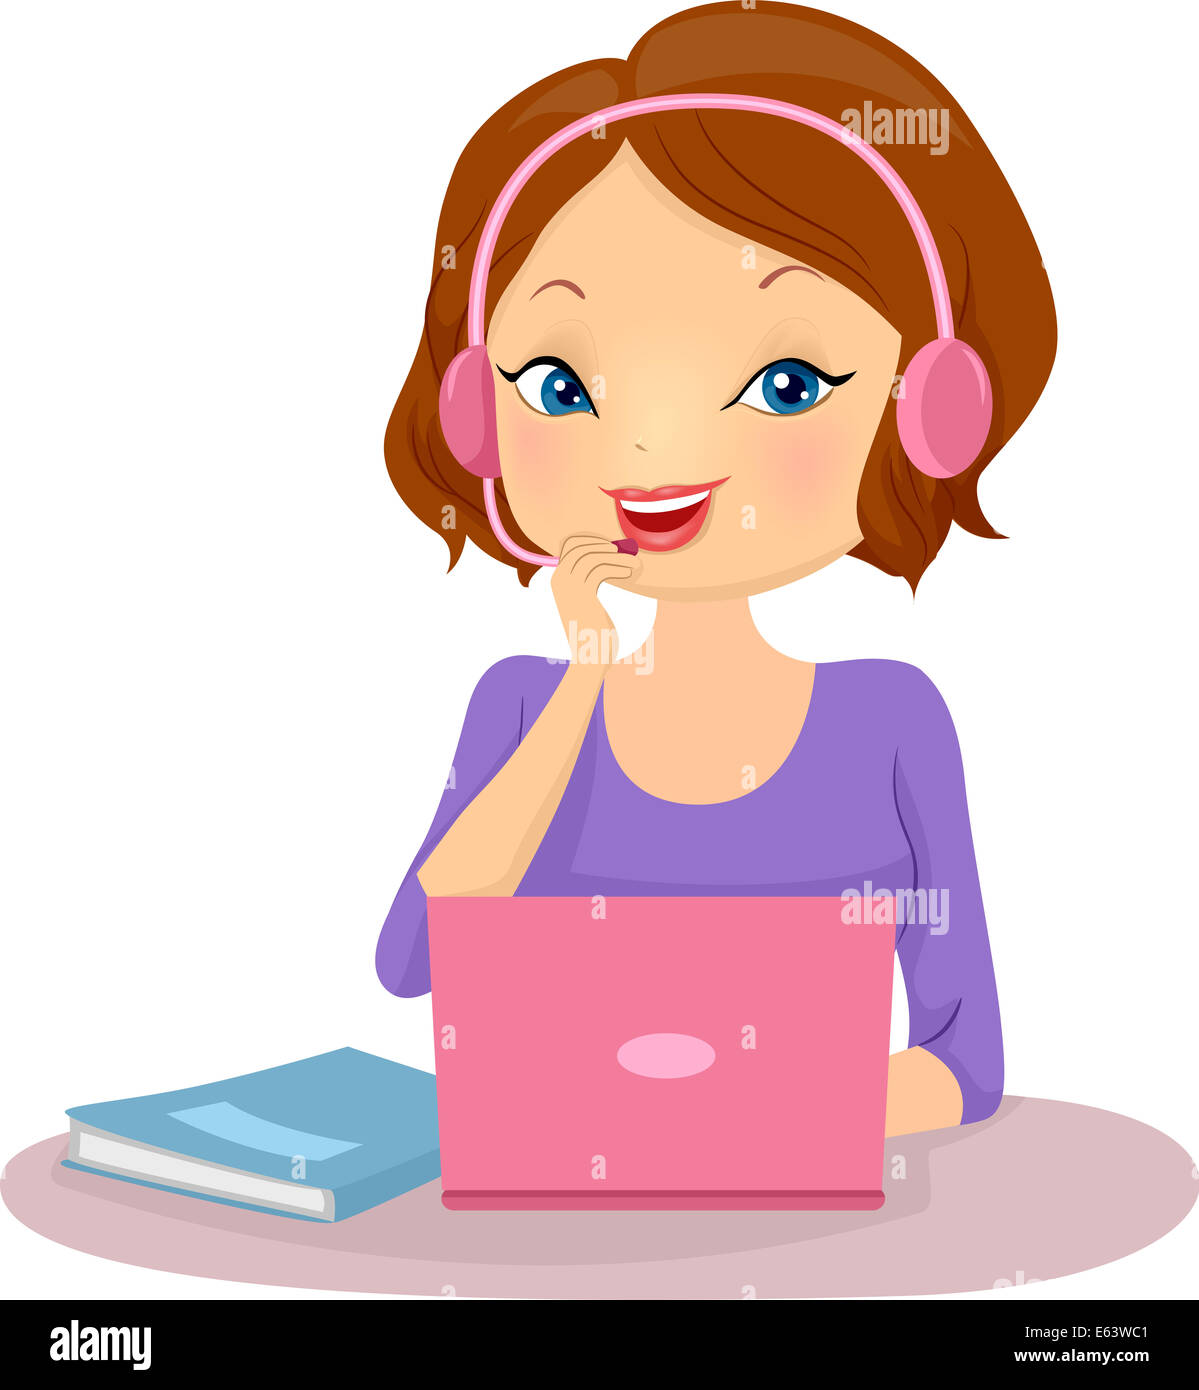 Illustration of a Female Tutor Teaching a Foreign Language Online Stock Photo